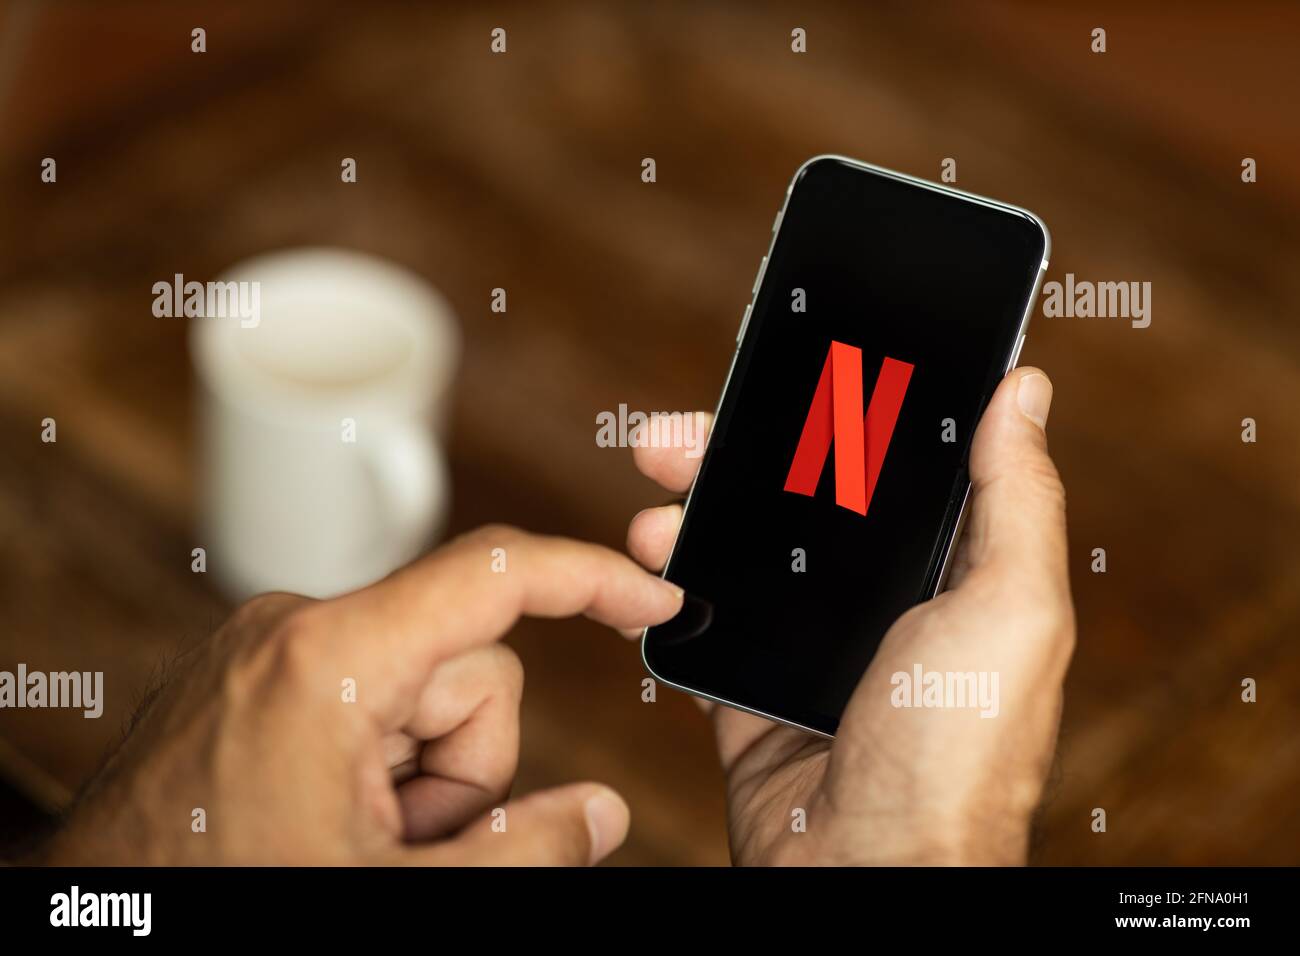 Man holding a smartphone in a cafe. Netflix logo on the display. Selective focus. Stock Photo